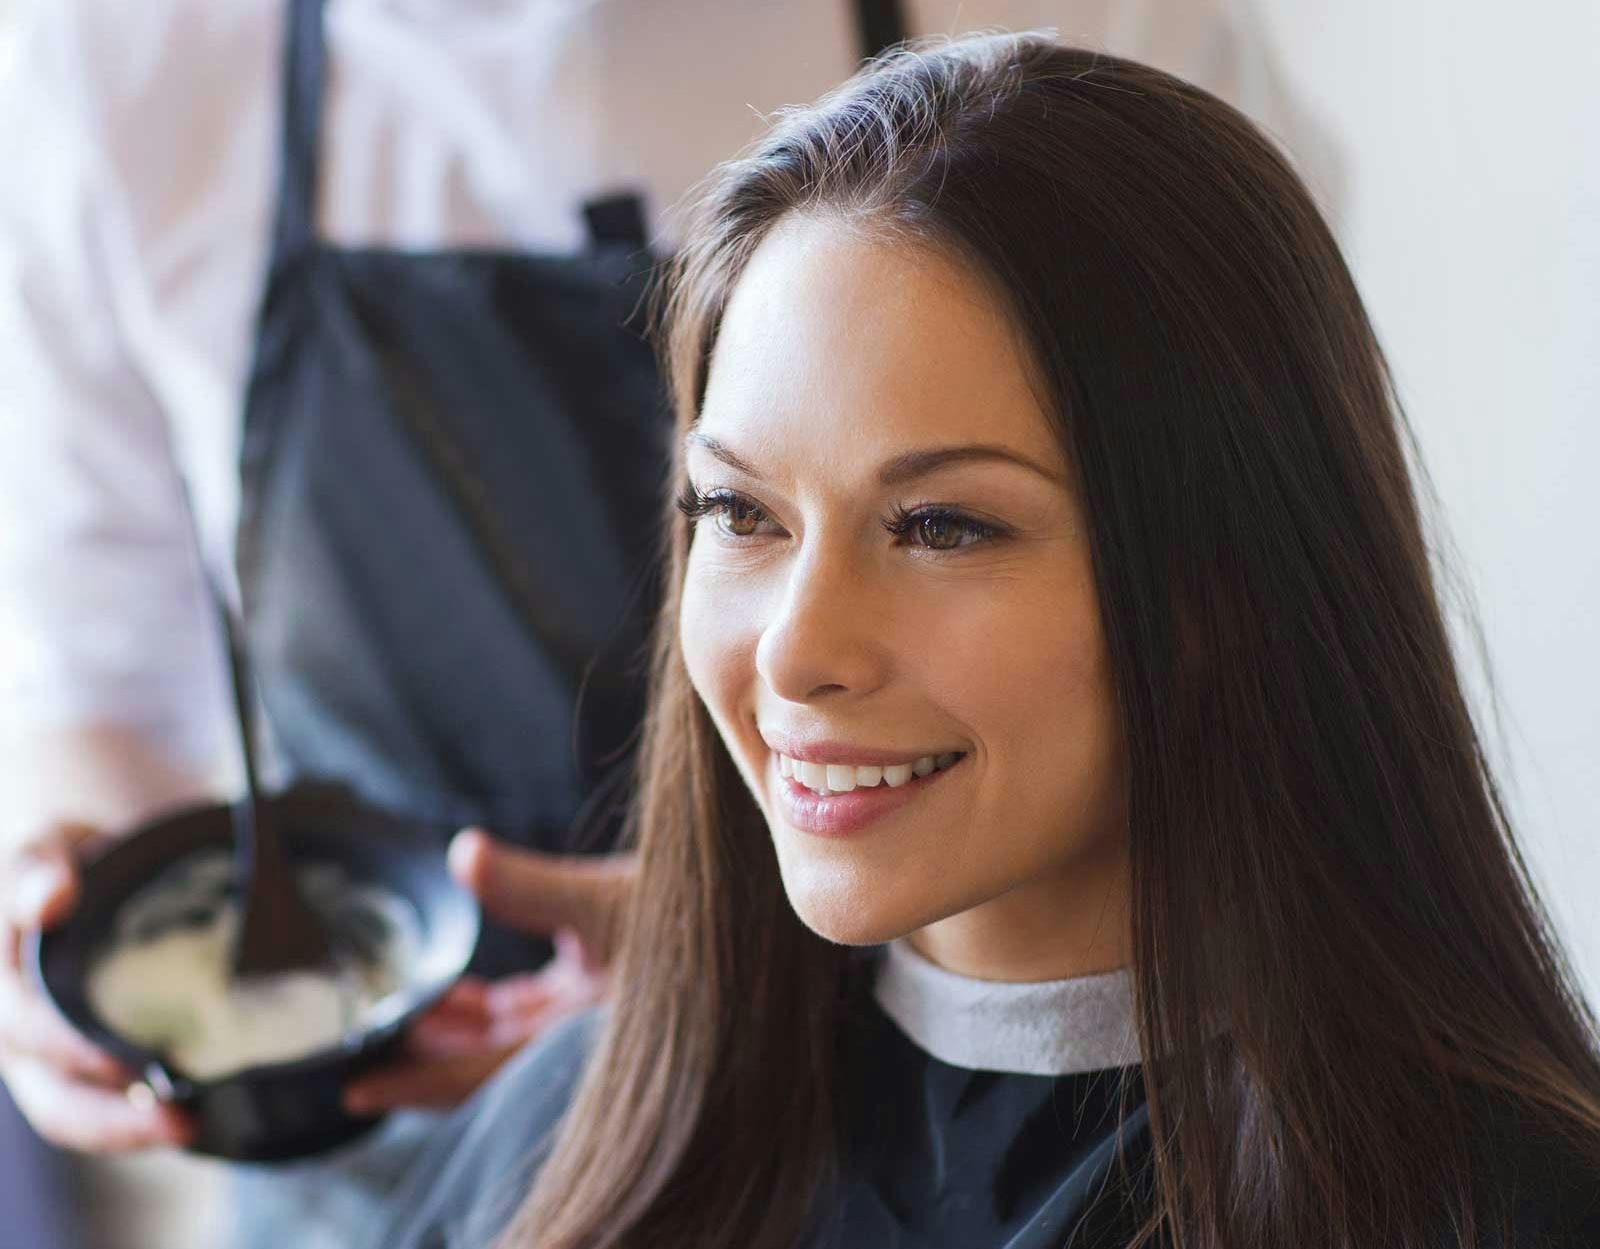 10 Things Hair Colorists Want You to Know